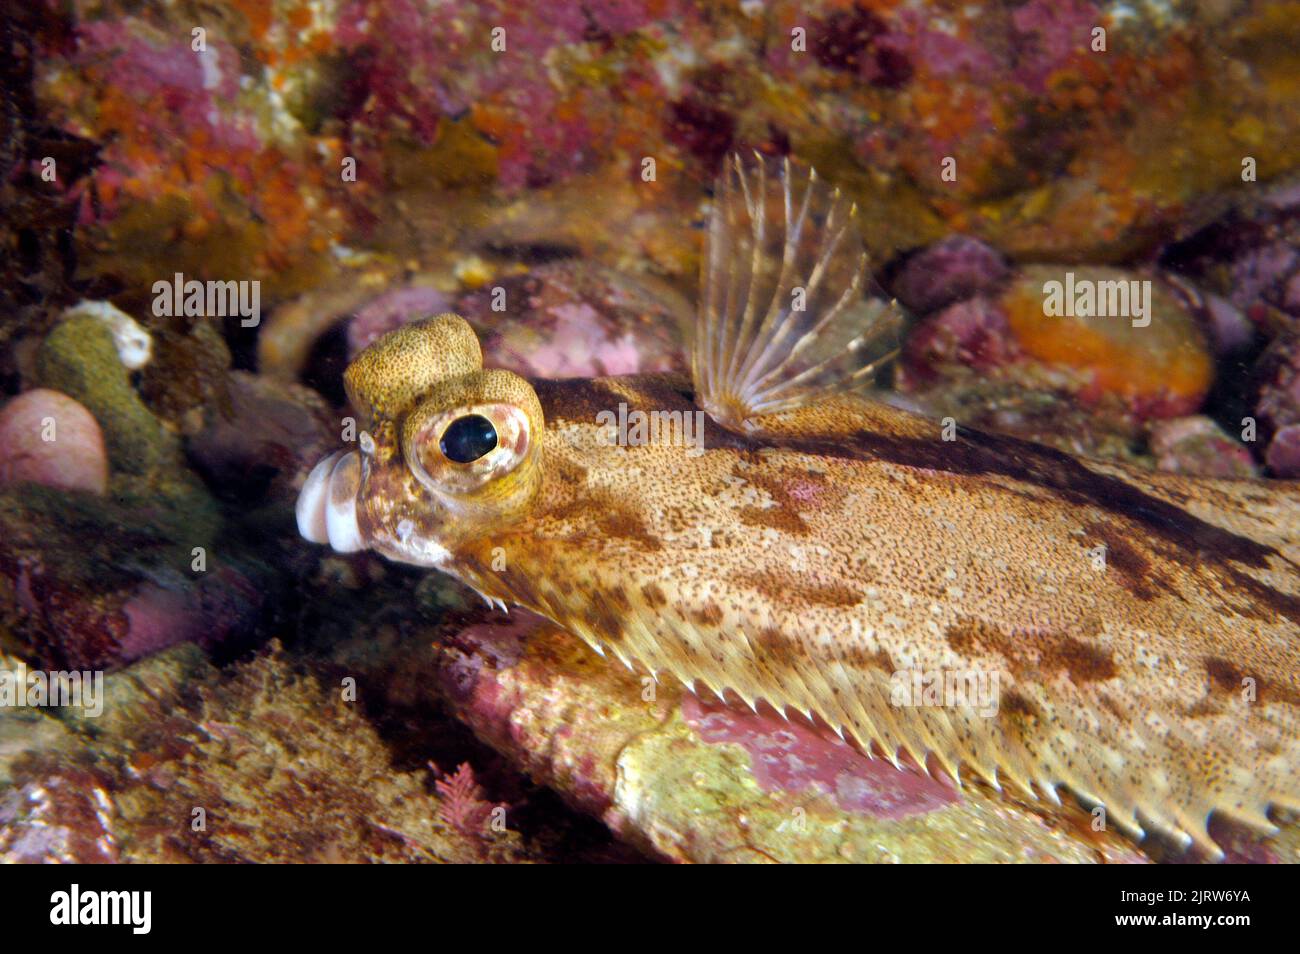 A flounder rests in a reef ledge at night allowing me to get close enough to capture its unusual facial structure. Stock Photo